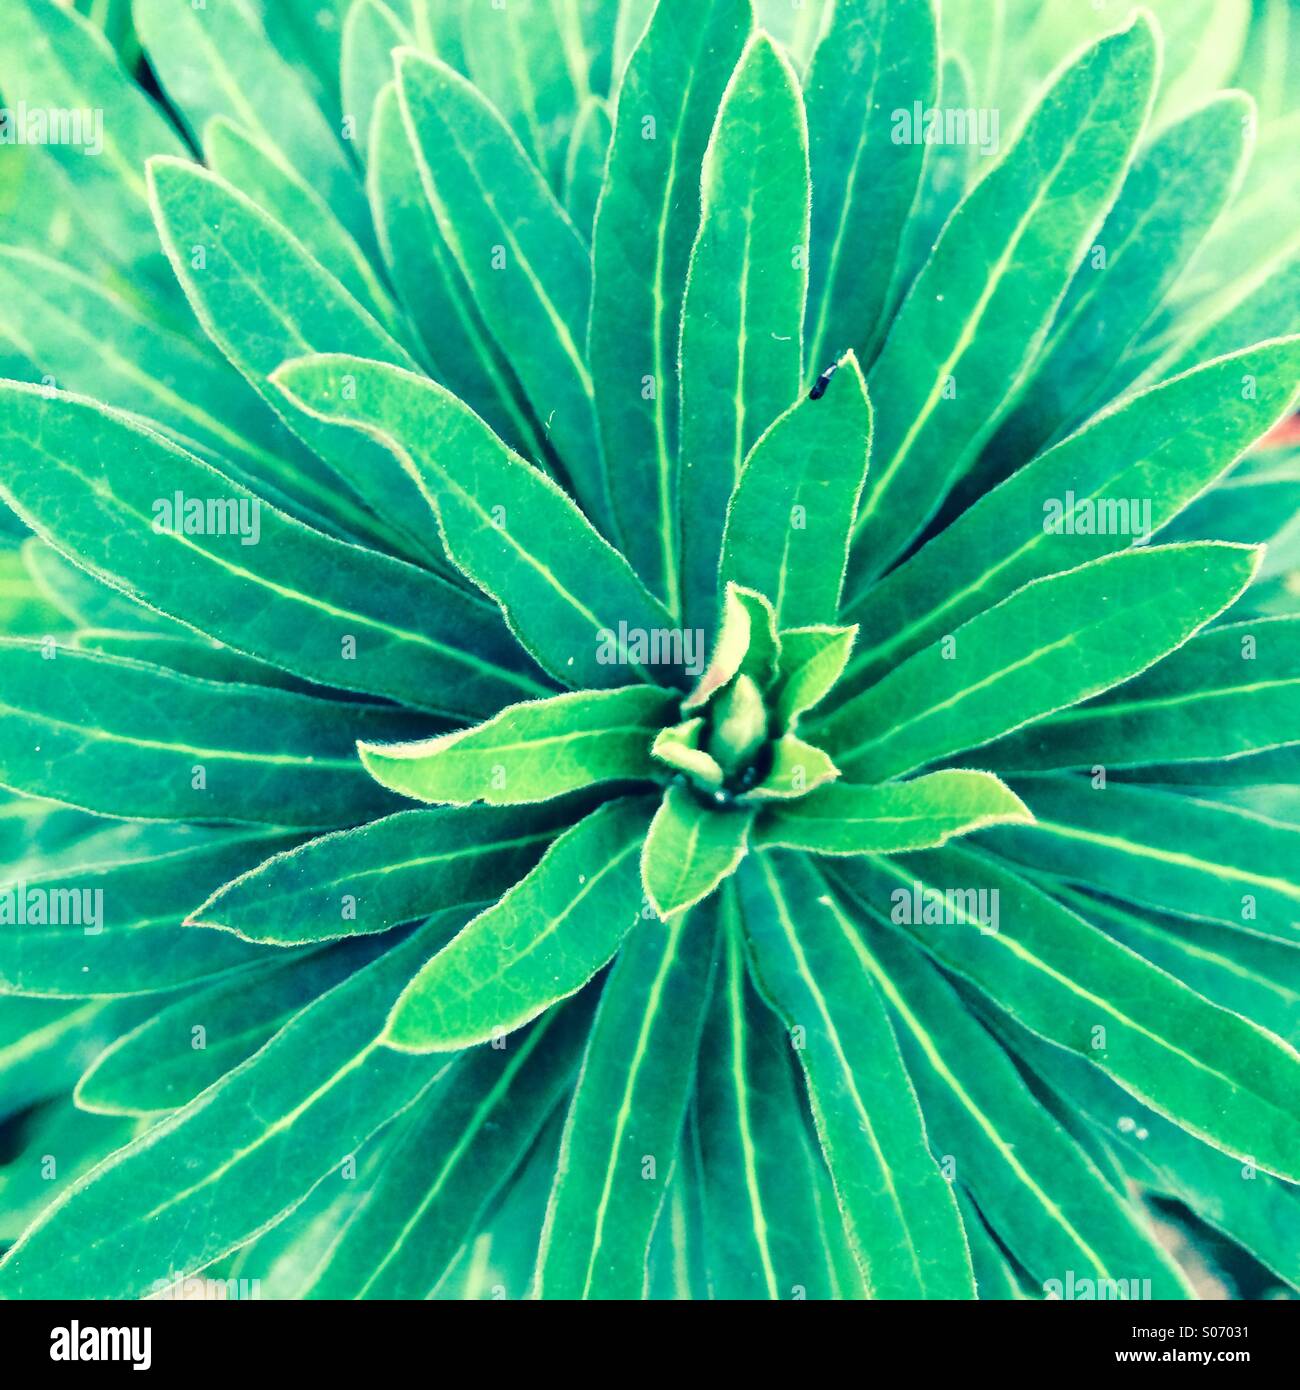 Macro shot of green plant with multiple leaves radiating from the Center Stock Photo